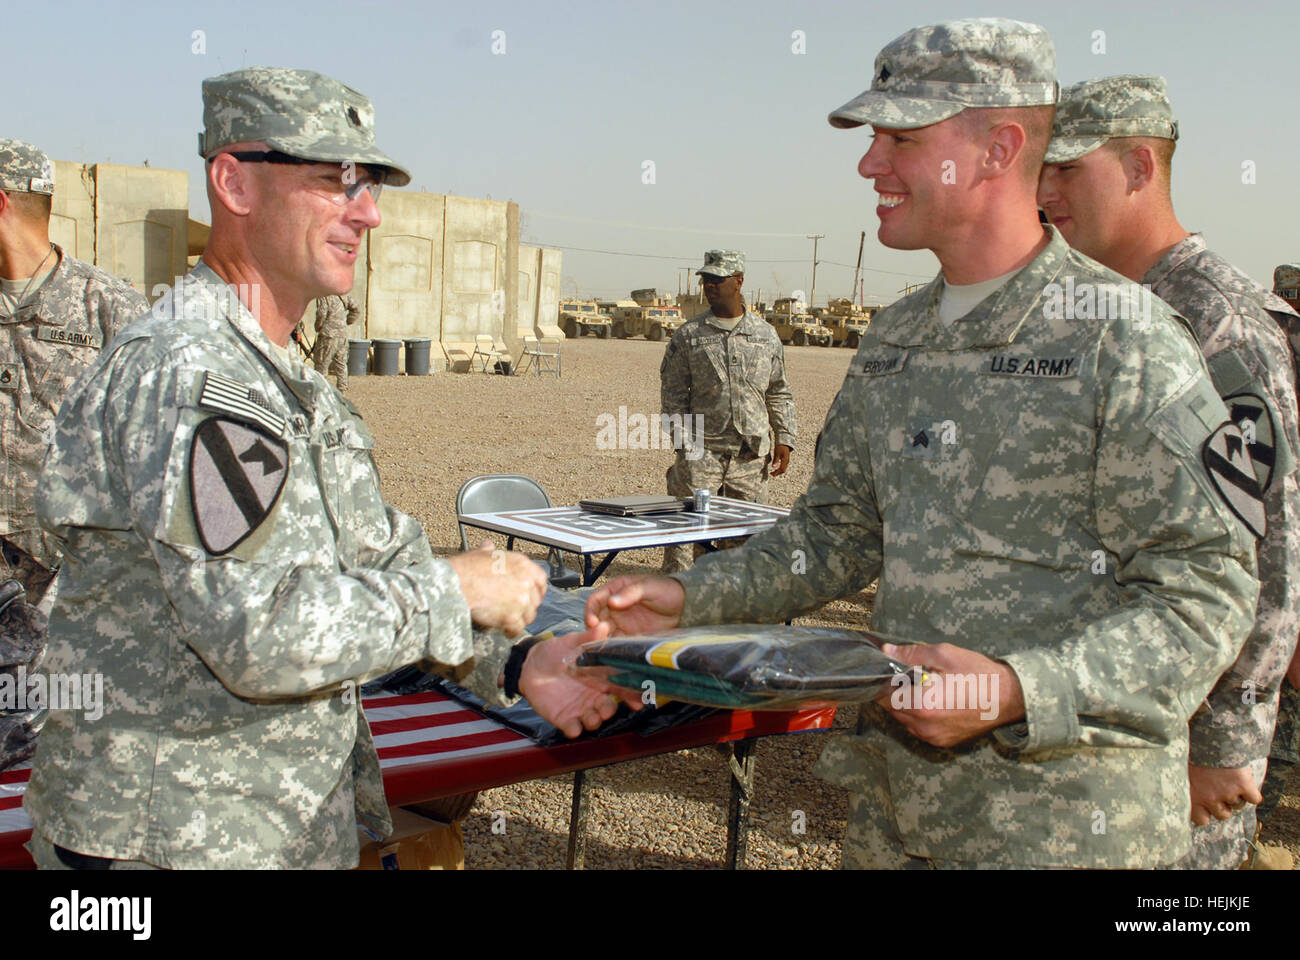 Lt. Col. Eric Schwegler (left), of Ozark, Ala., presents an 'Ironhorse' Brigade jersey to Sgt. James Brown of Binghampton, N.Y. Schwegler is commander of the 1st Battalion, 82nd Field Artillery Regiment, 1st Brigade Combat Team, 1st Cavalry Division. Brown, a track vehicle mechanic, said he re-enlisted so he could make retirement in the Army. 'I didn't do it for the money because I didn't get any,' joked Brown, who is assigned to Company G, 1st Bn., 82nd FA Regt. 'I know I am taking care of my family and reaching my goal of retirement.' Brown was one of 83 'Dragon' Battalion Soldiers who have  Stock Photo